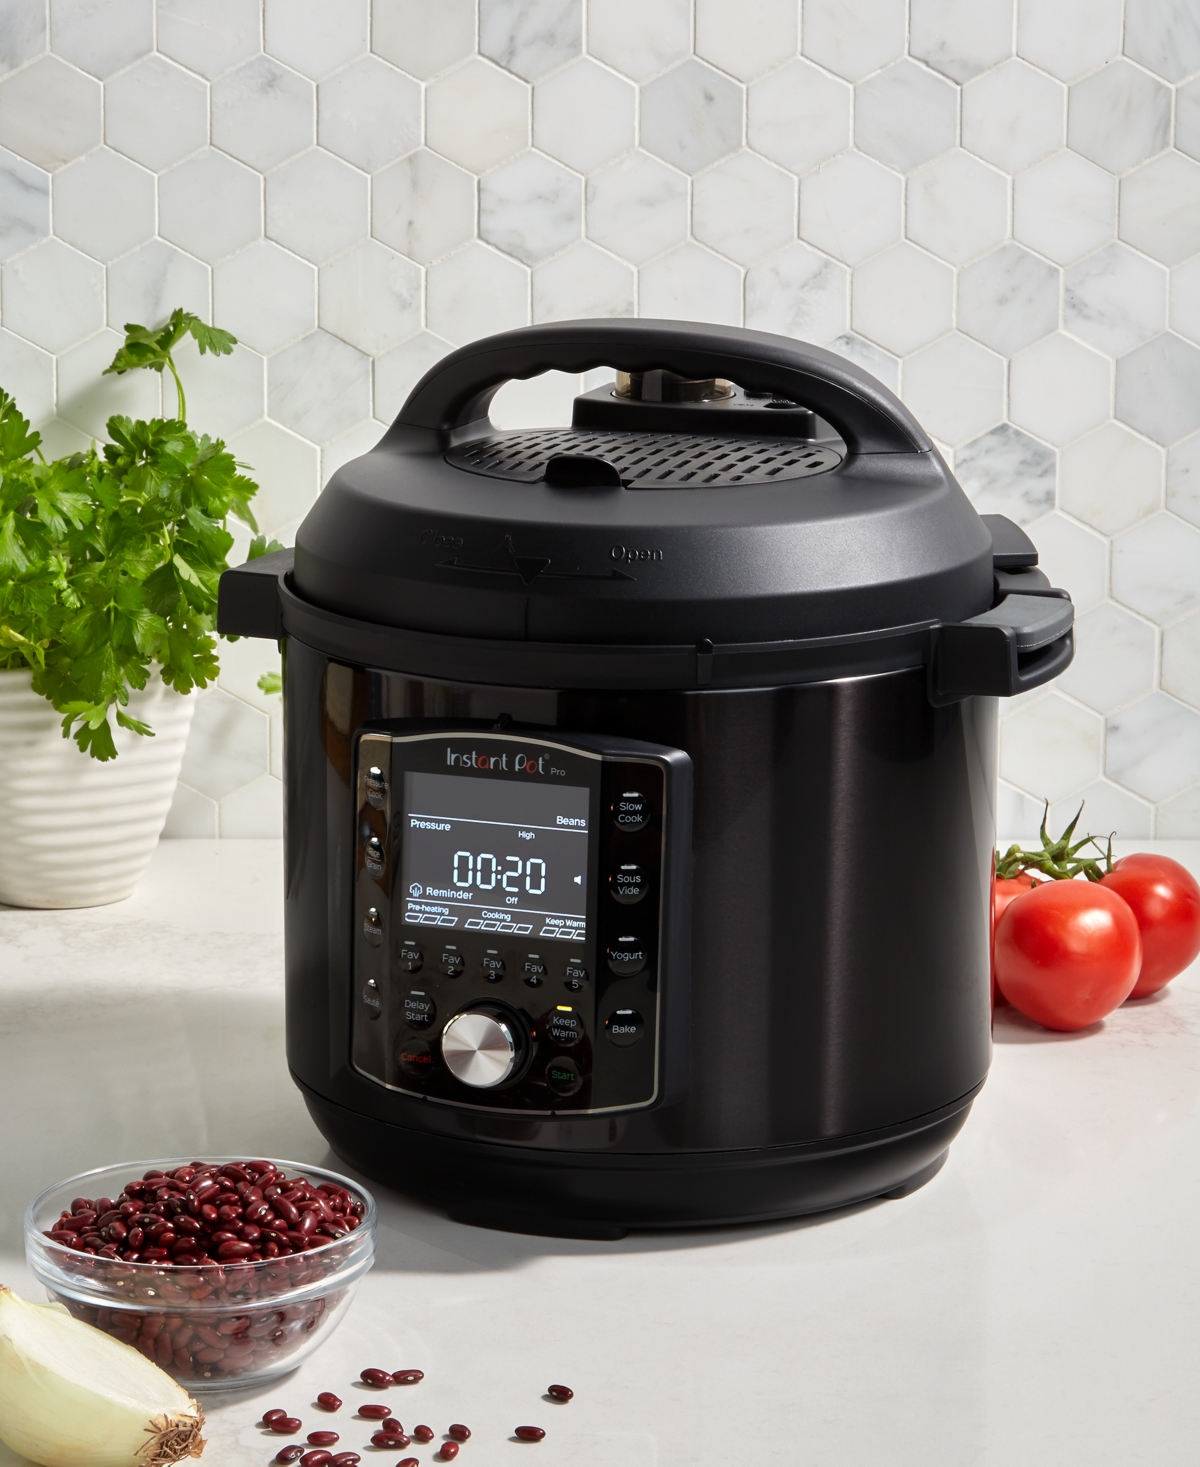 A image of a black Instant Pot on a kitchen counter.